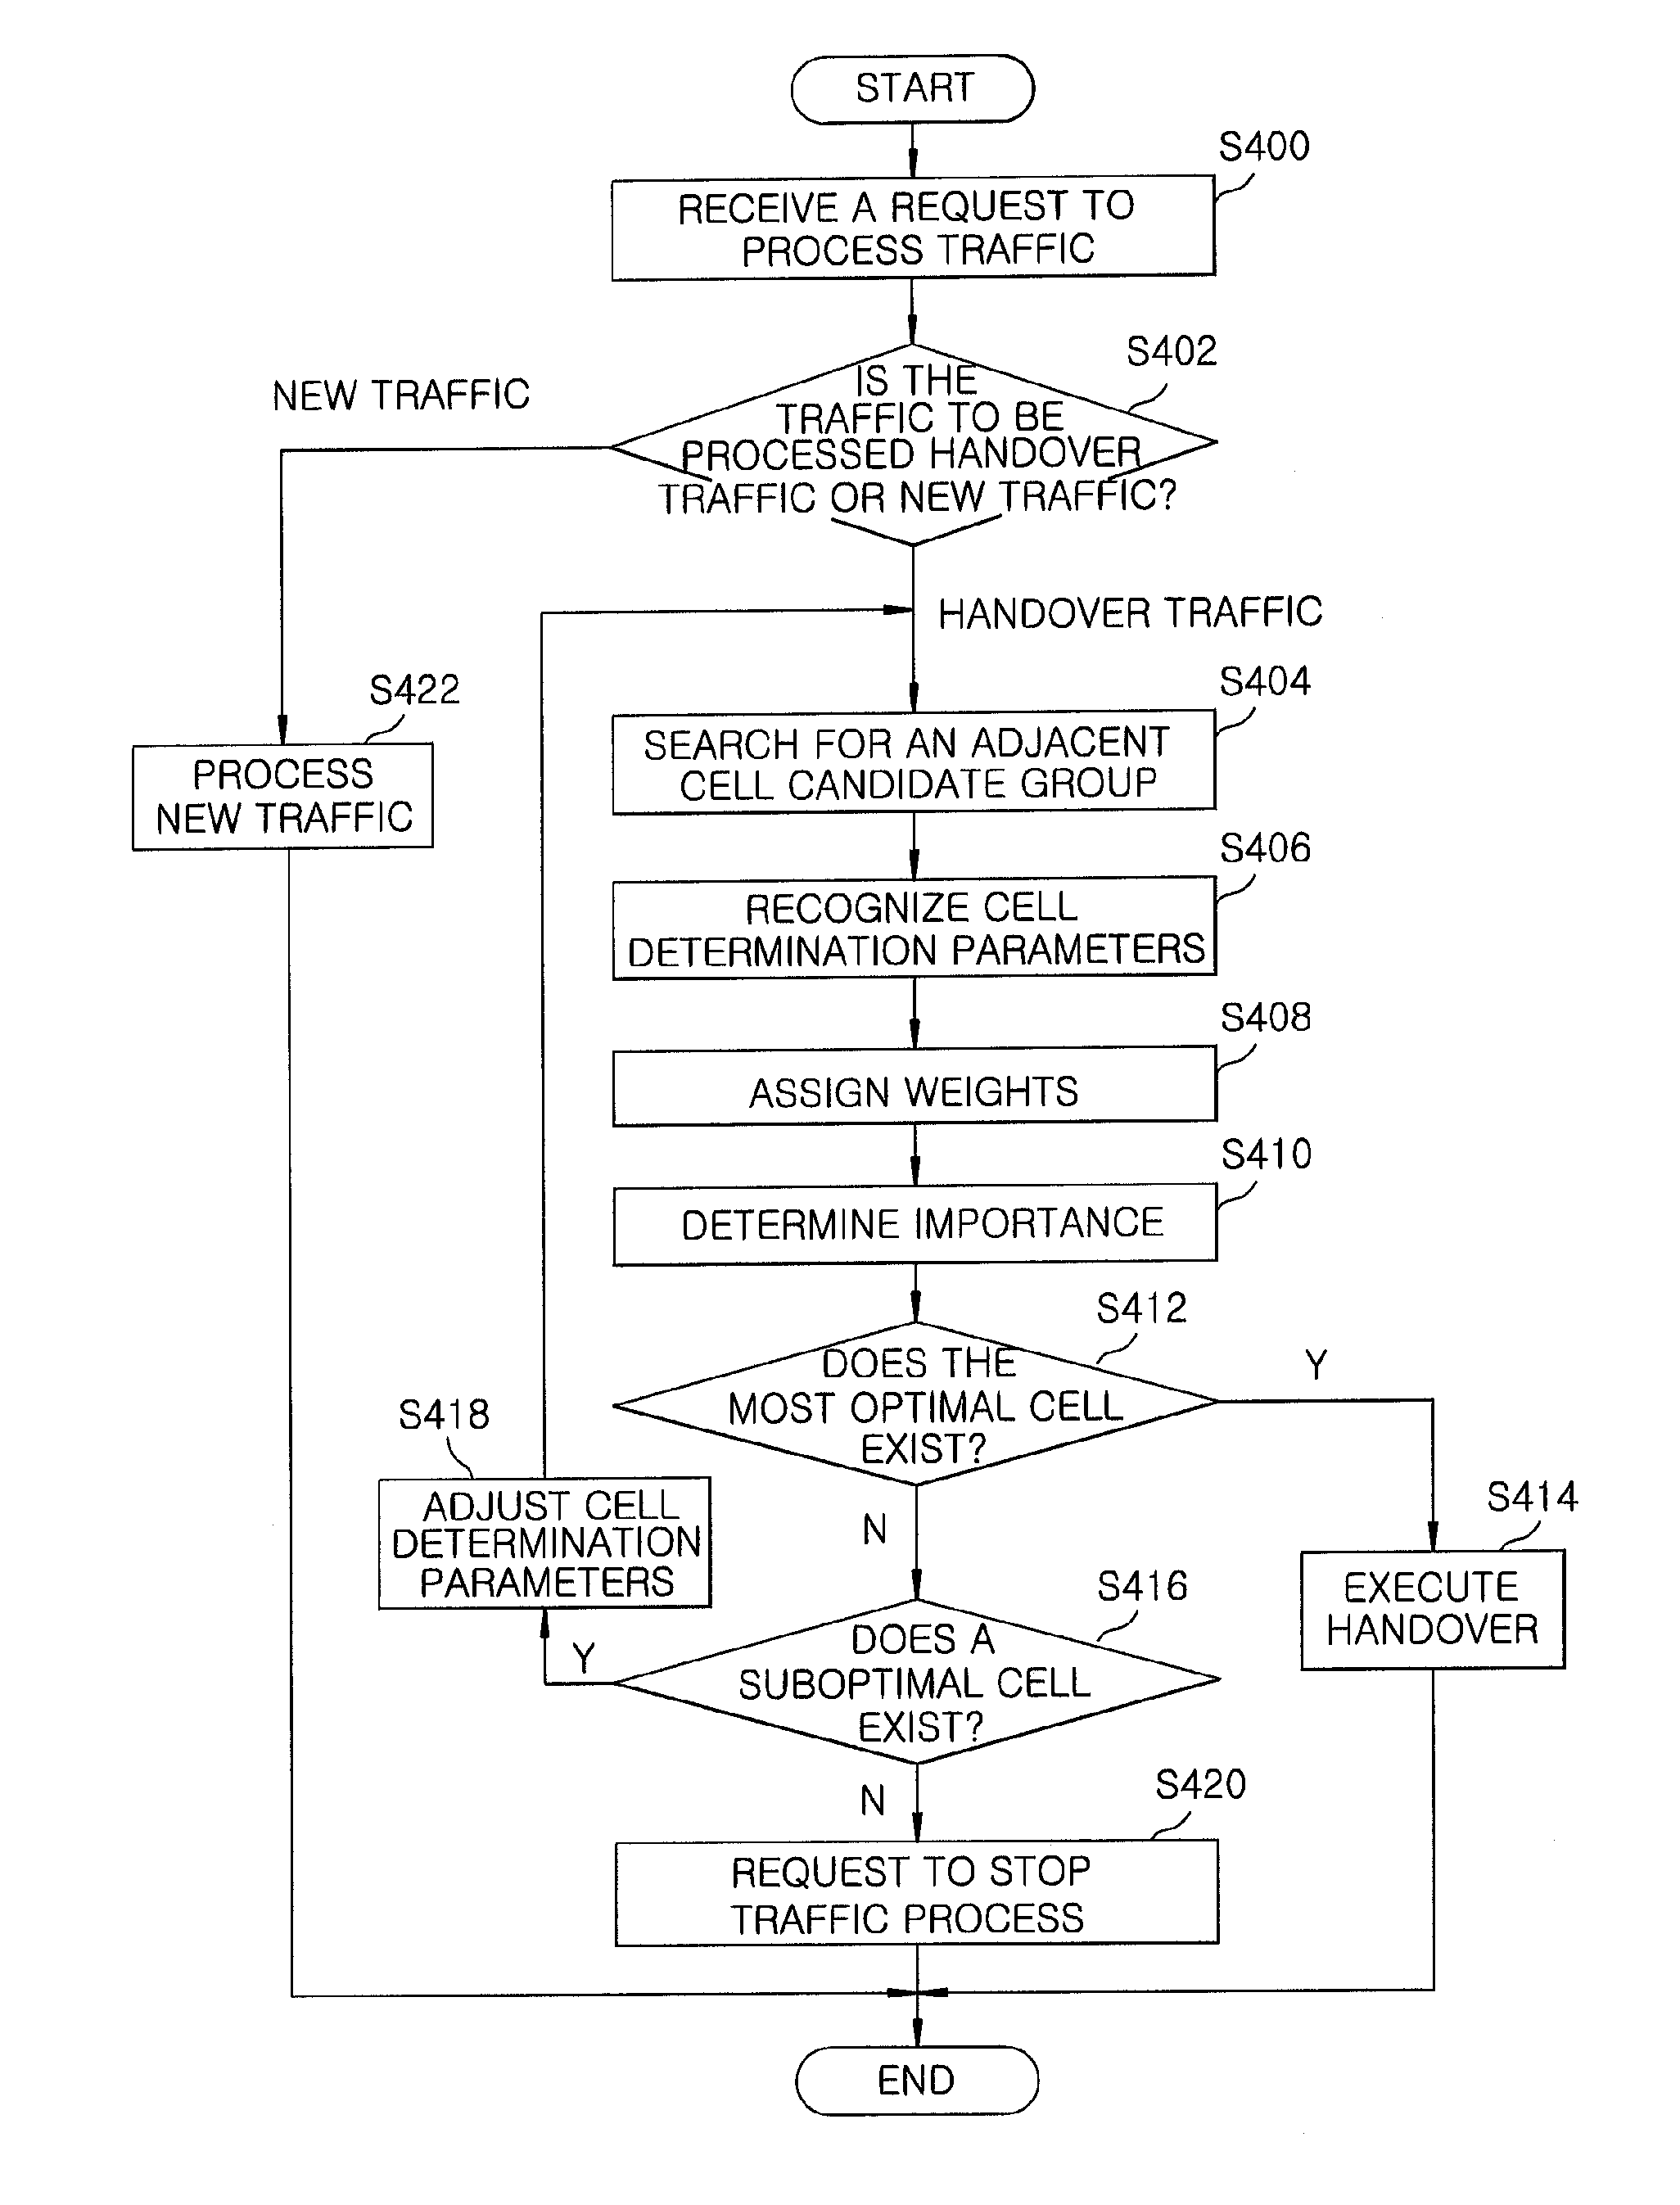 Apparatus and method for performing handover in advanced mobile communication system